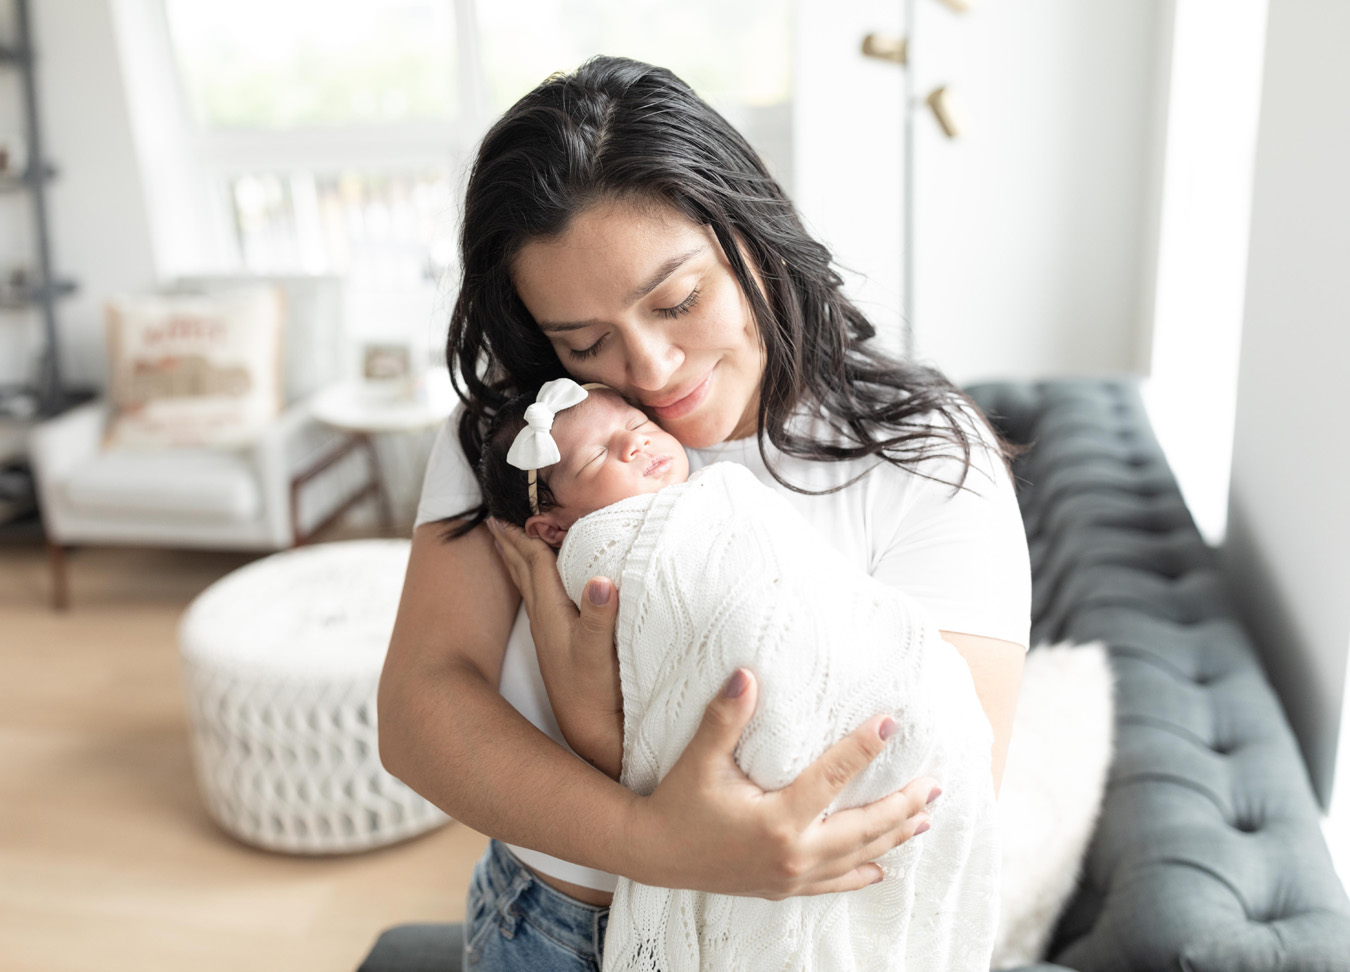 a loving embrace between a mom and her newborn baby photographed by a newborn photographer in D.C.